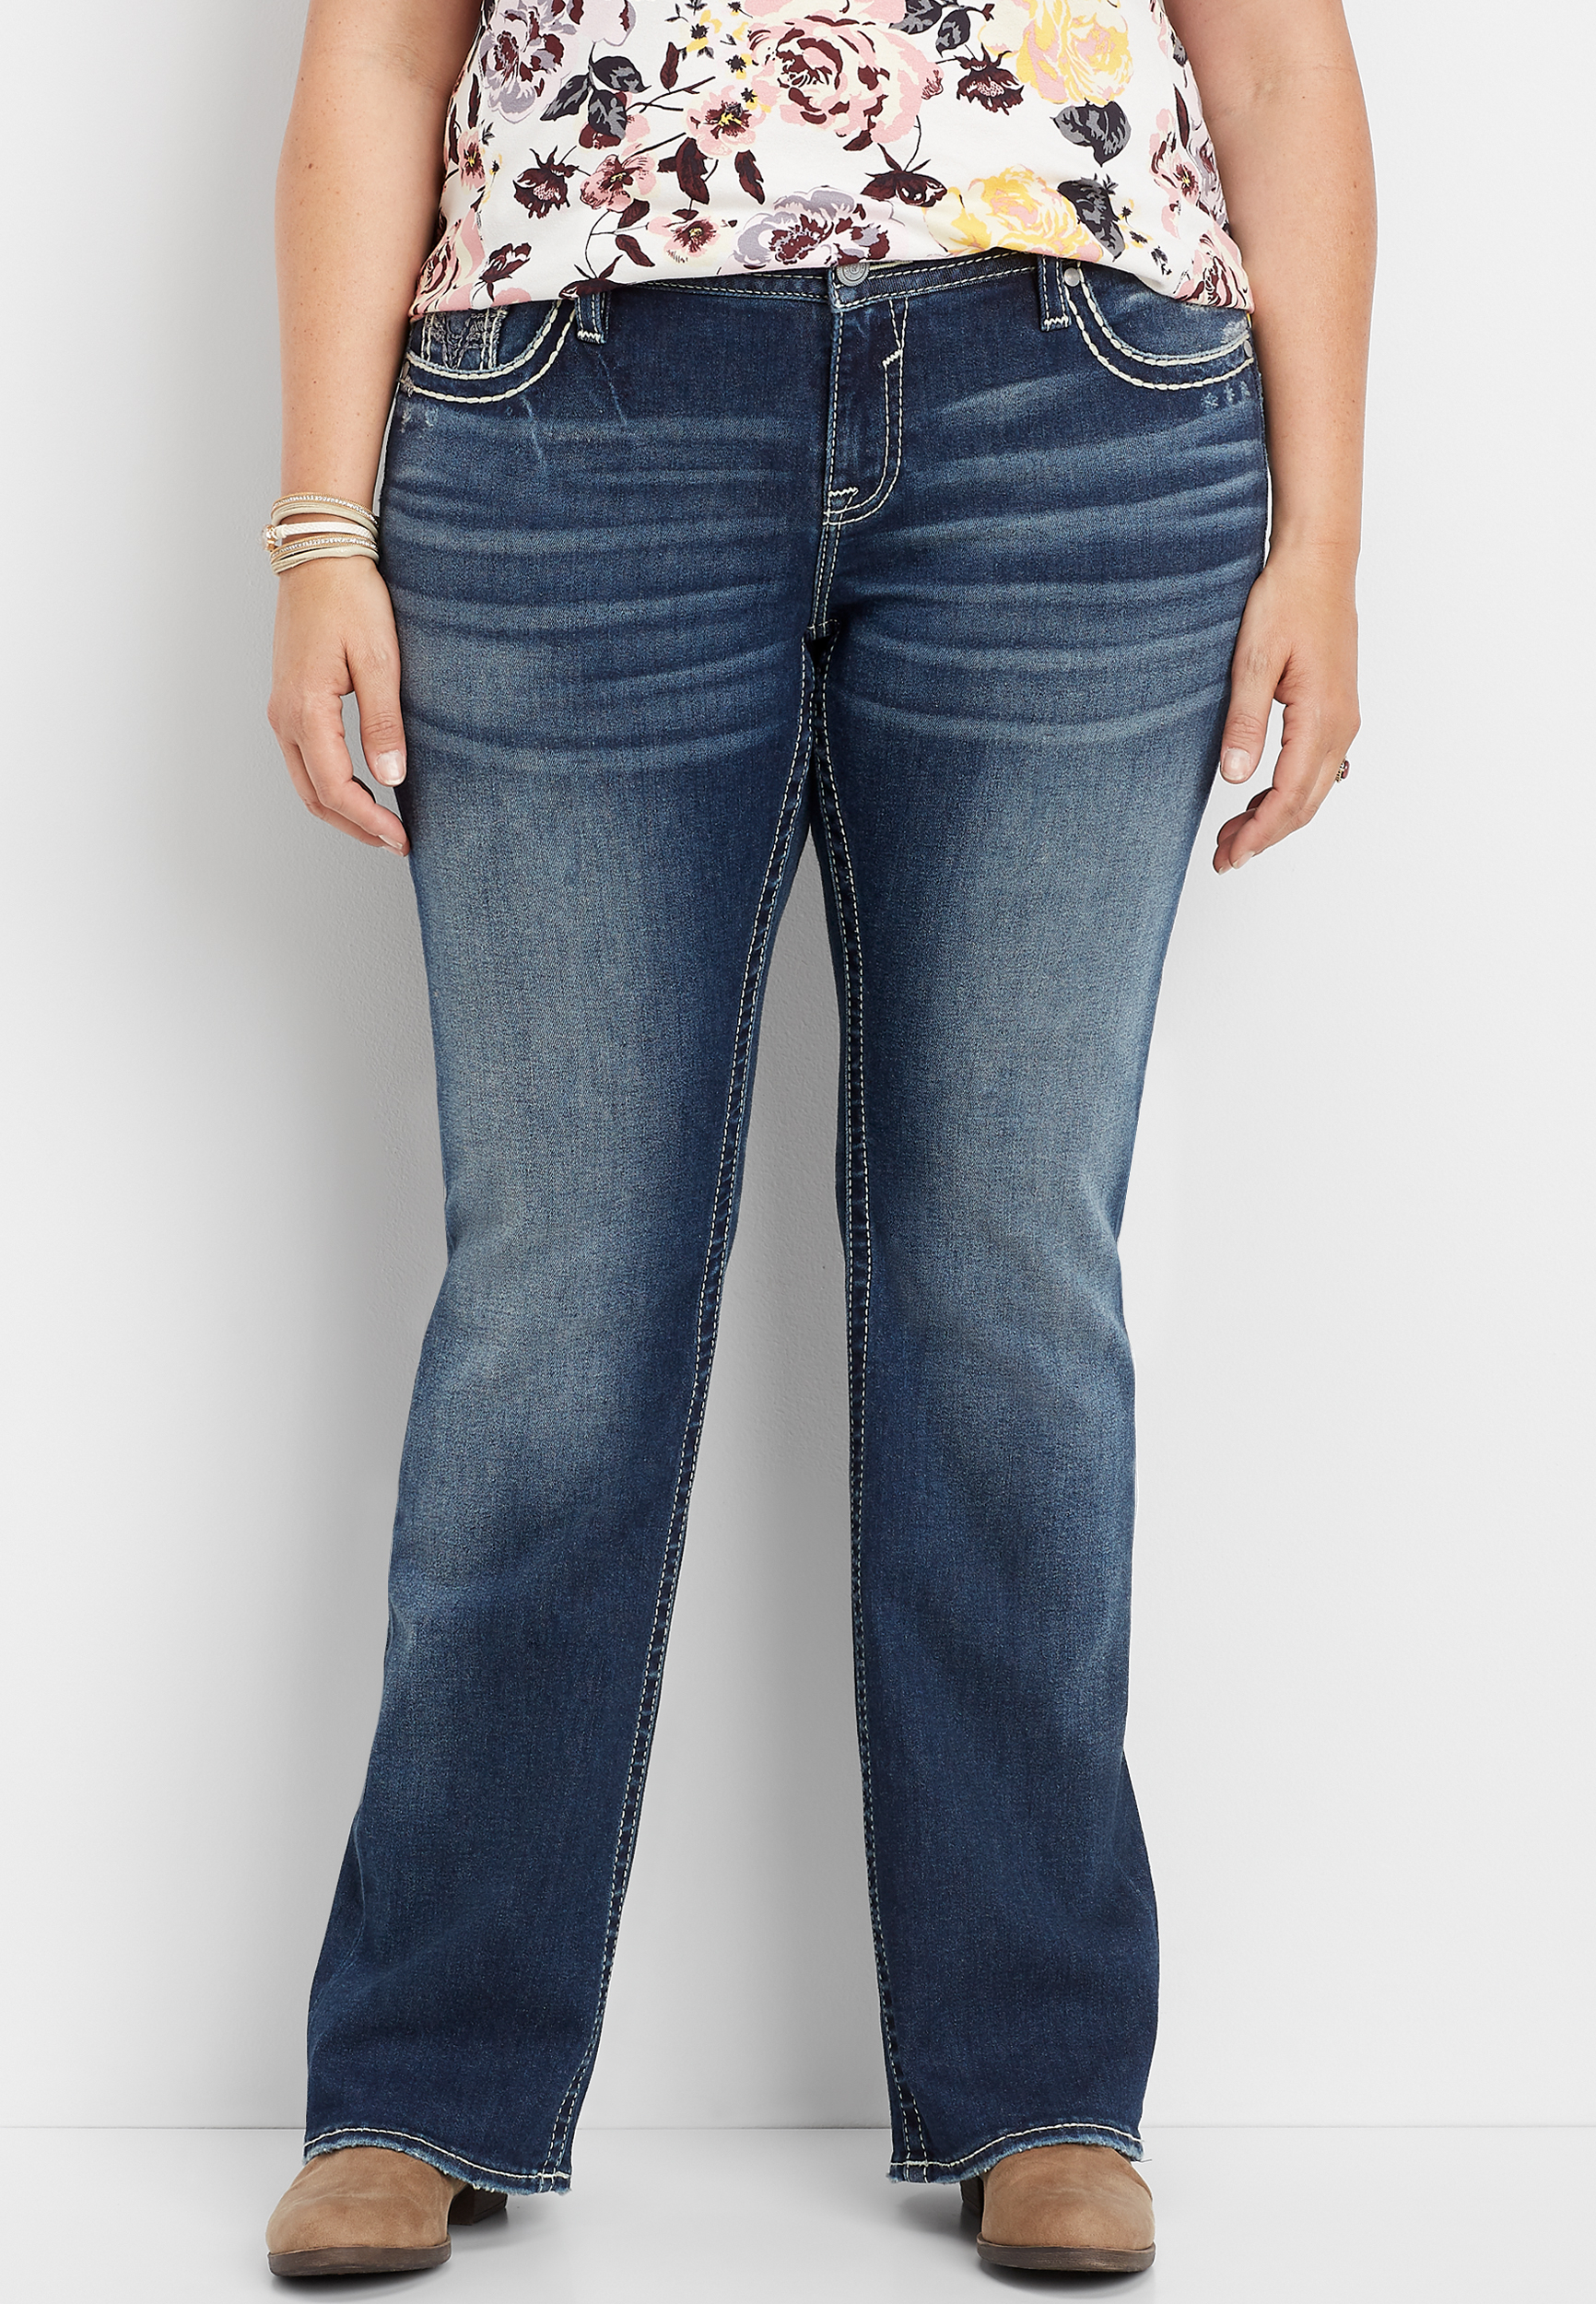 maurices plus size jeans